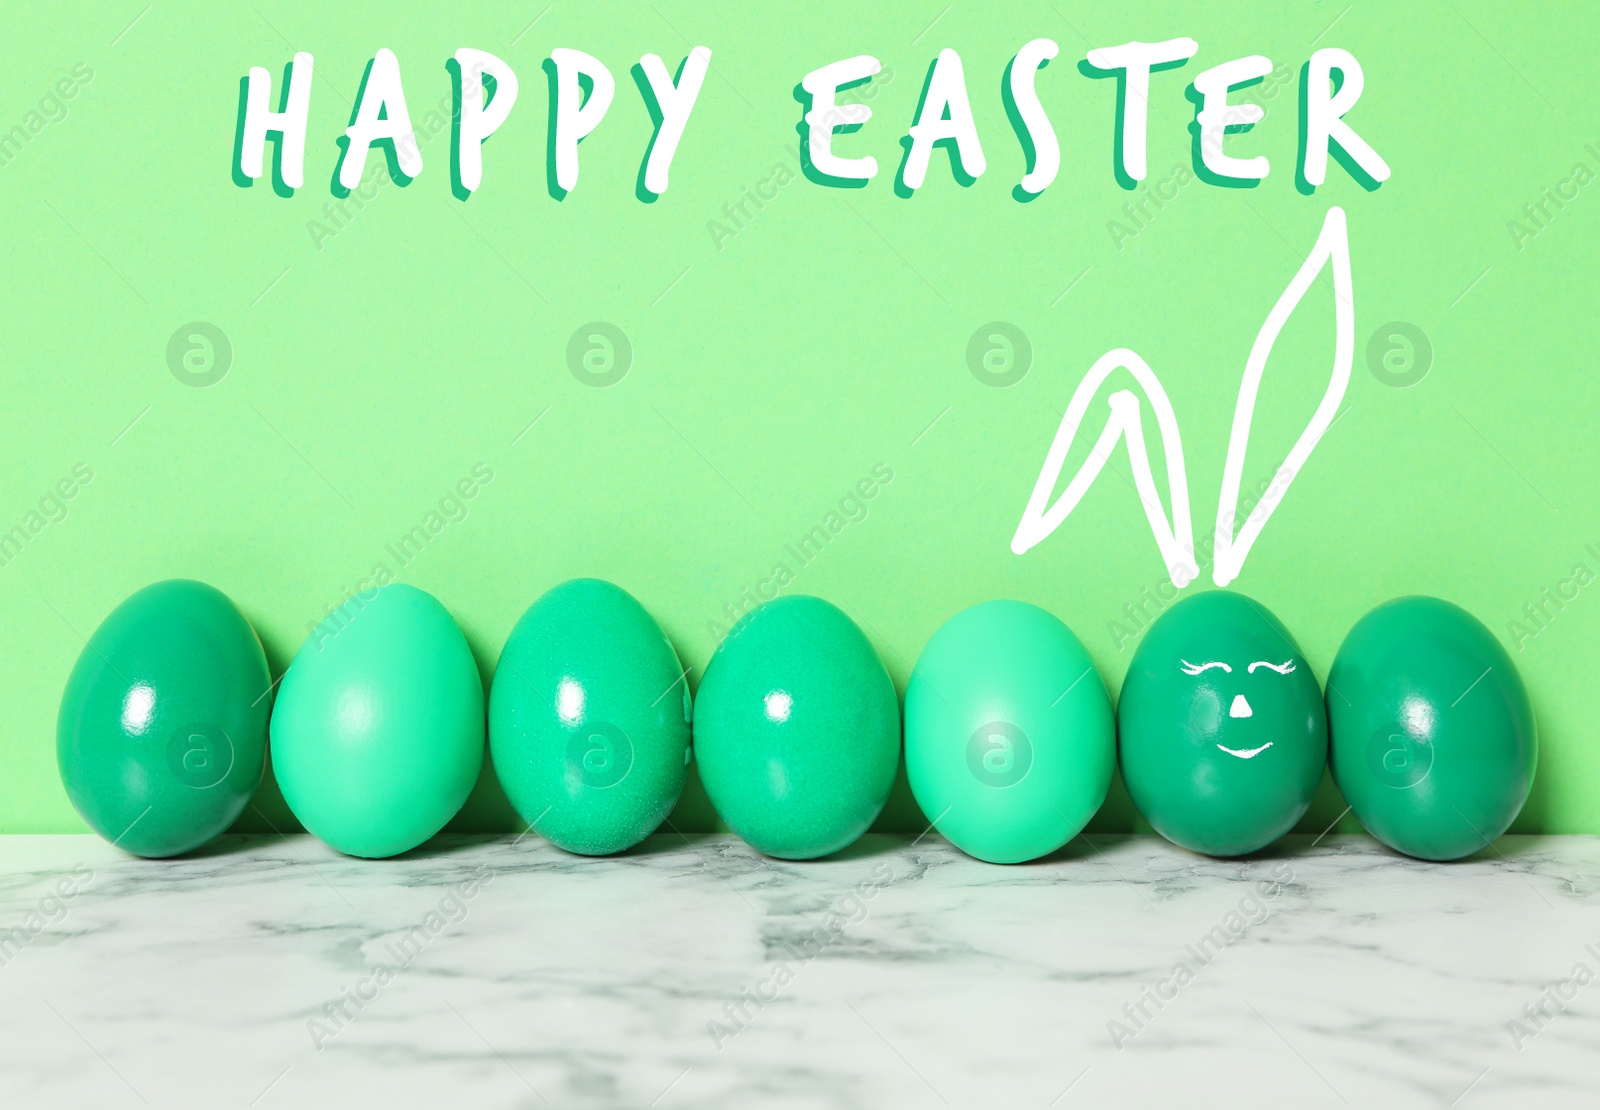 Image of One egg with drawn face and ears as Easter bunny among others on white marble table against green background